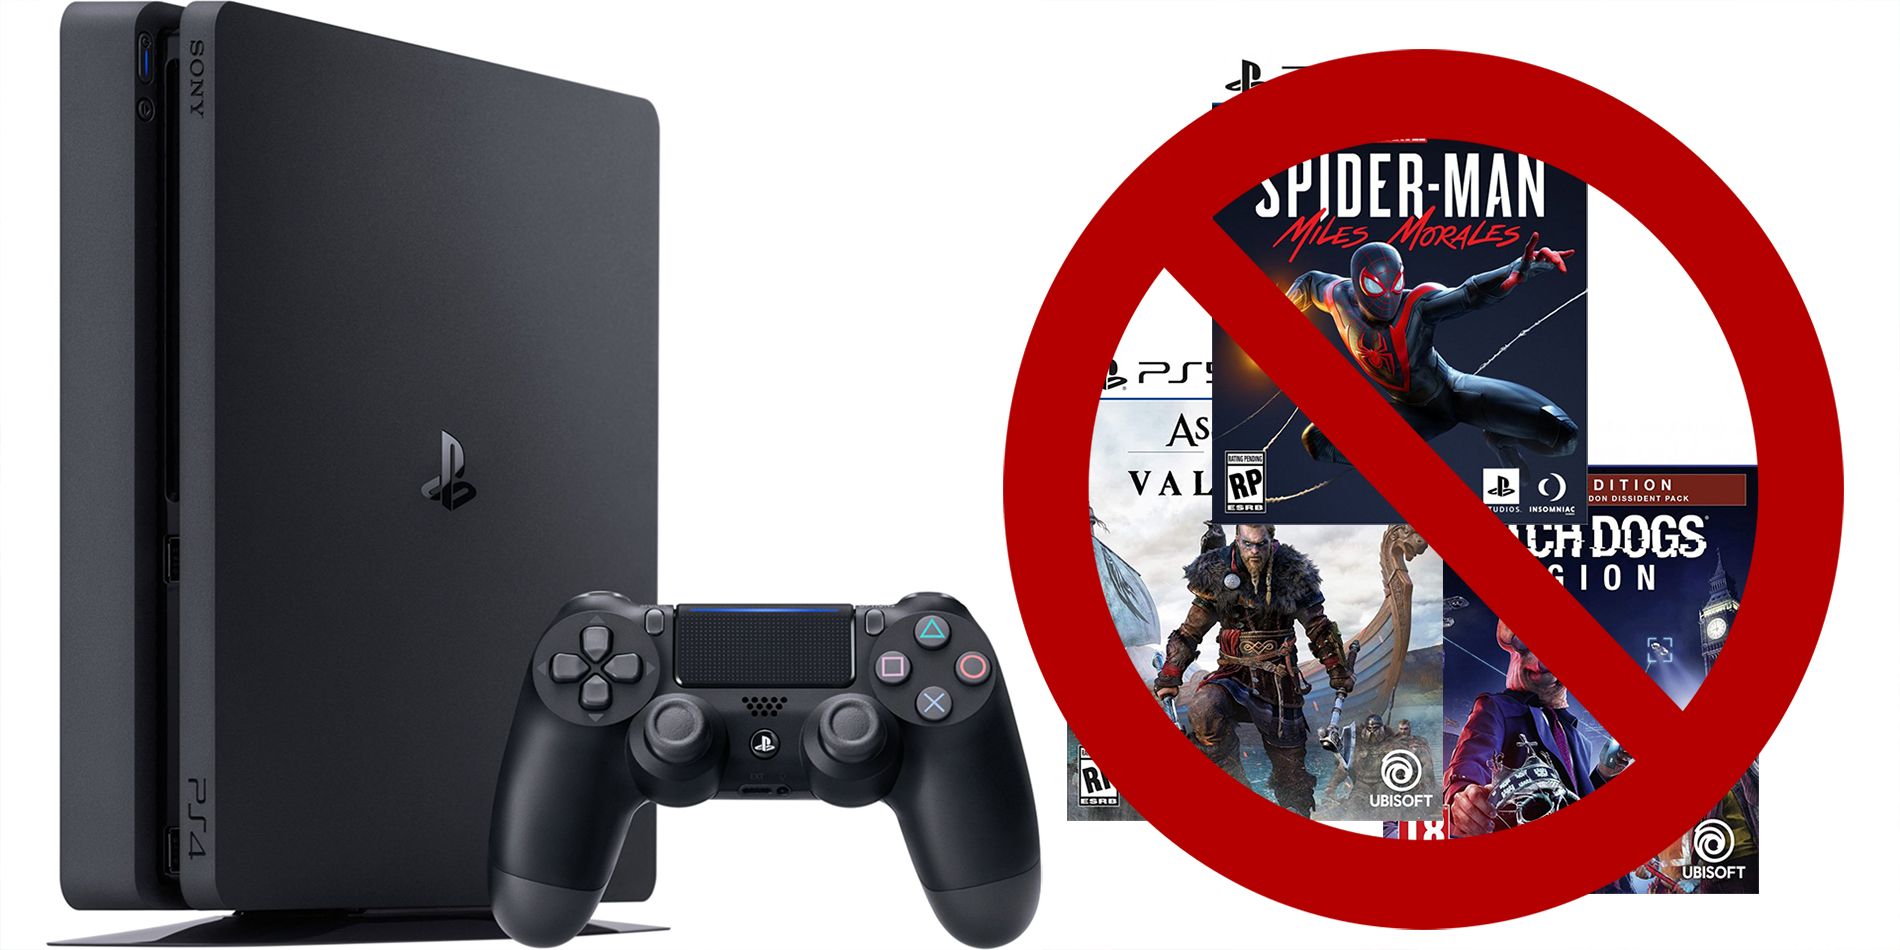 is it possible to play ps4 games on ps5